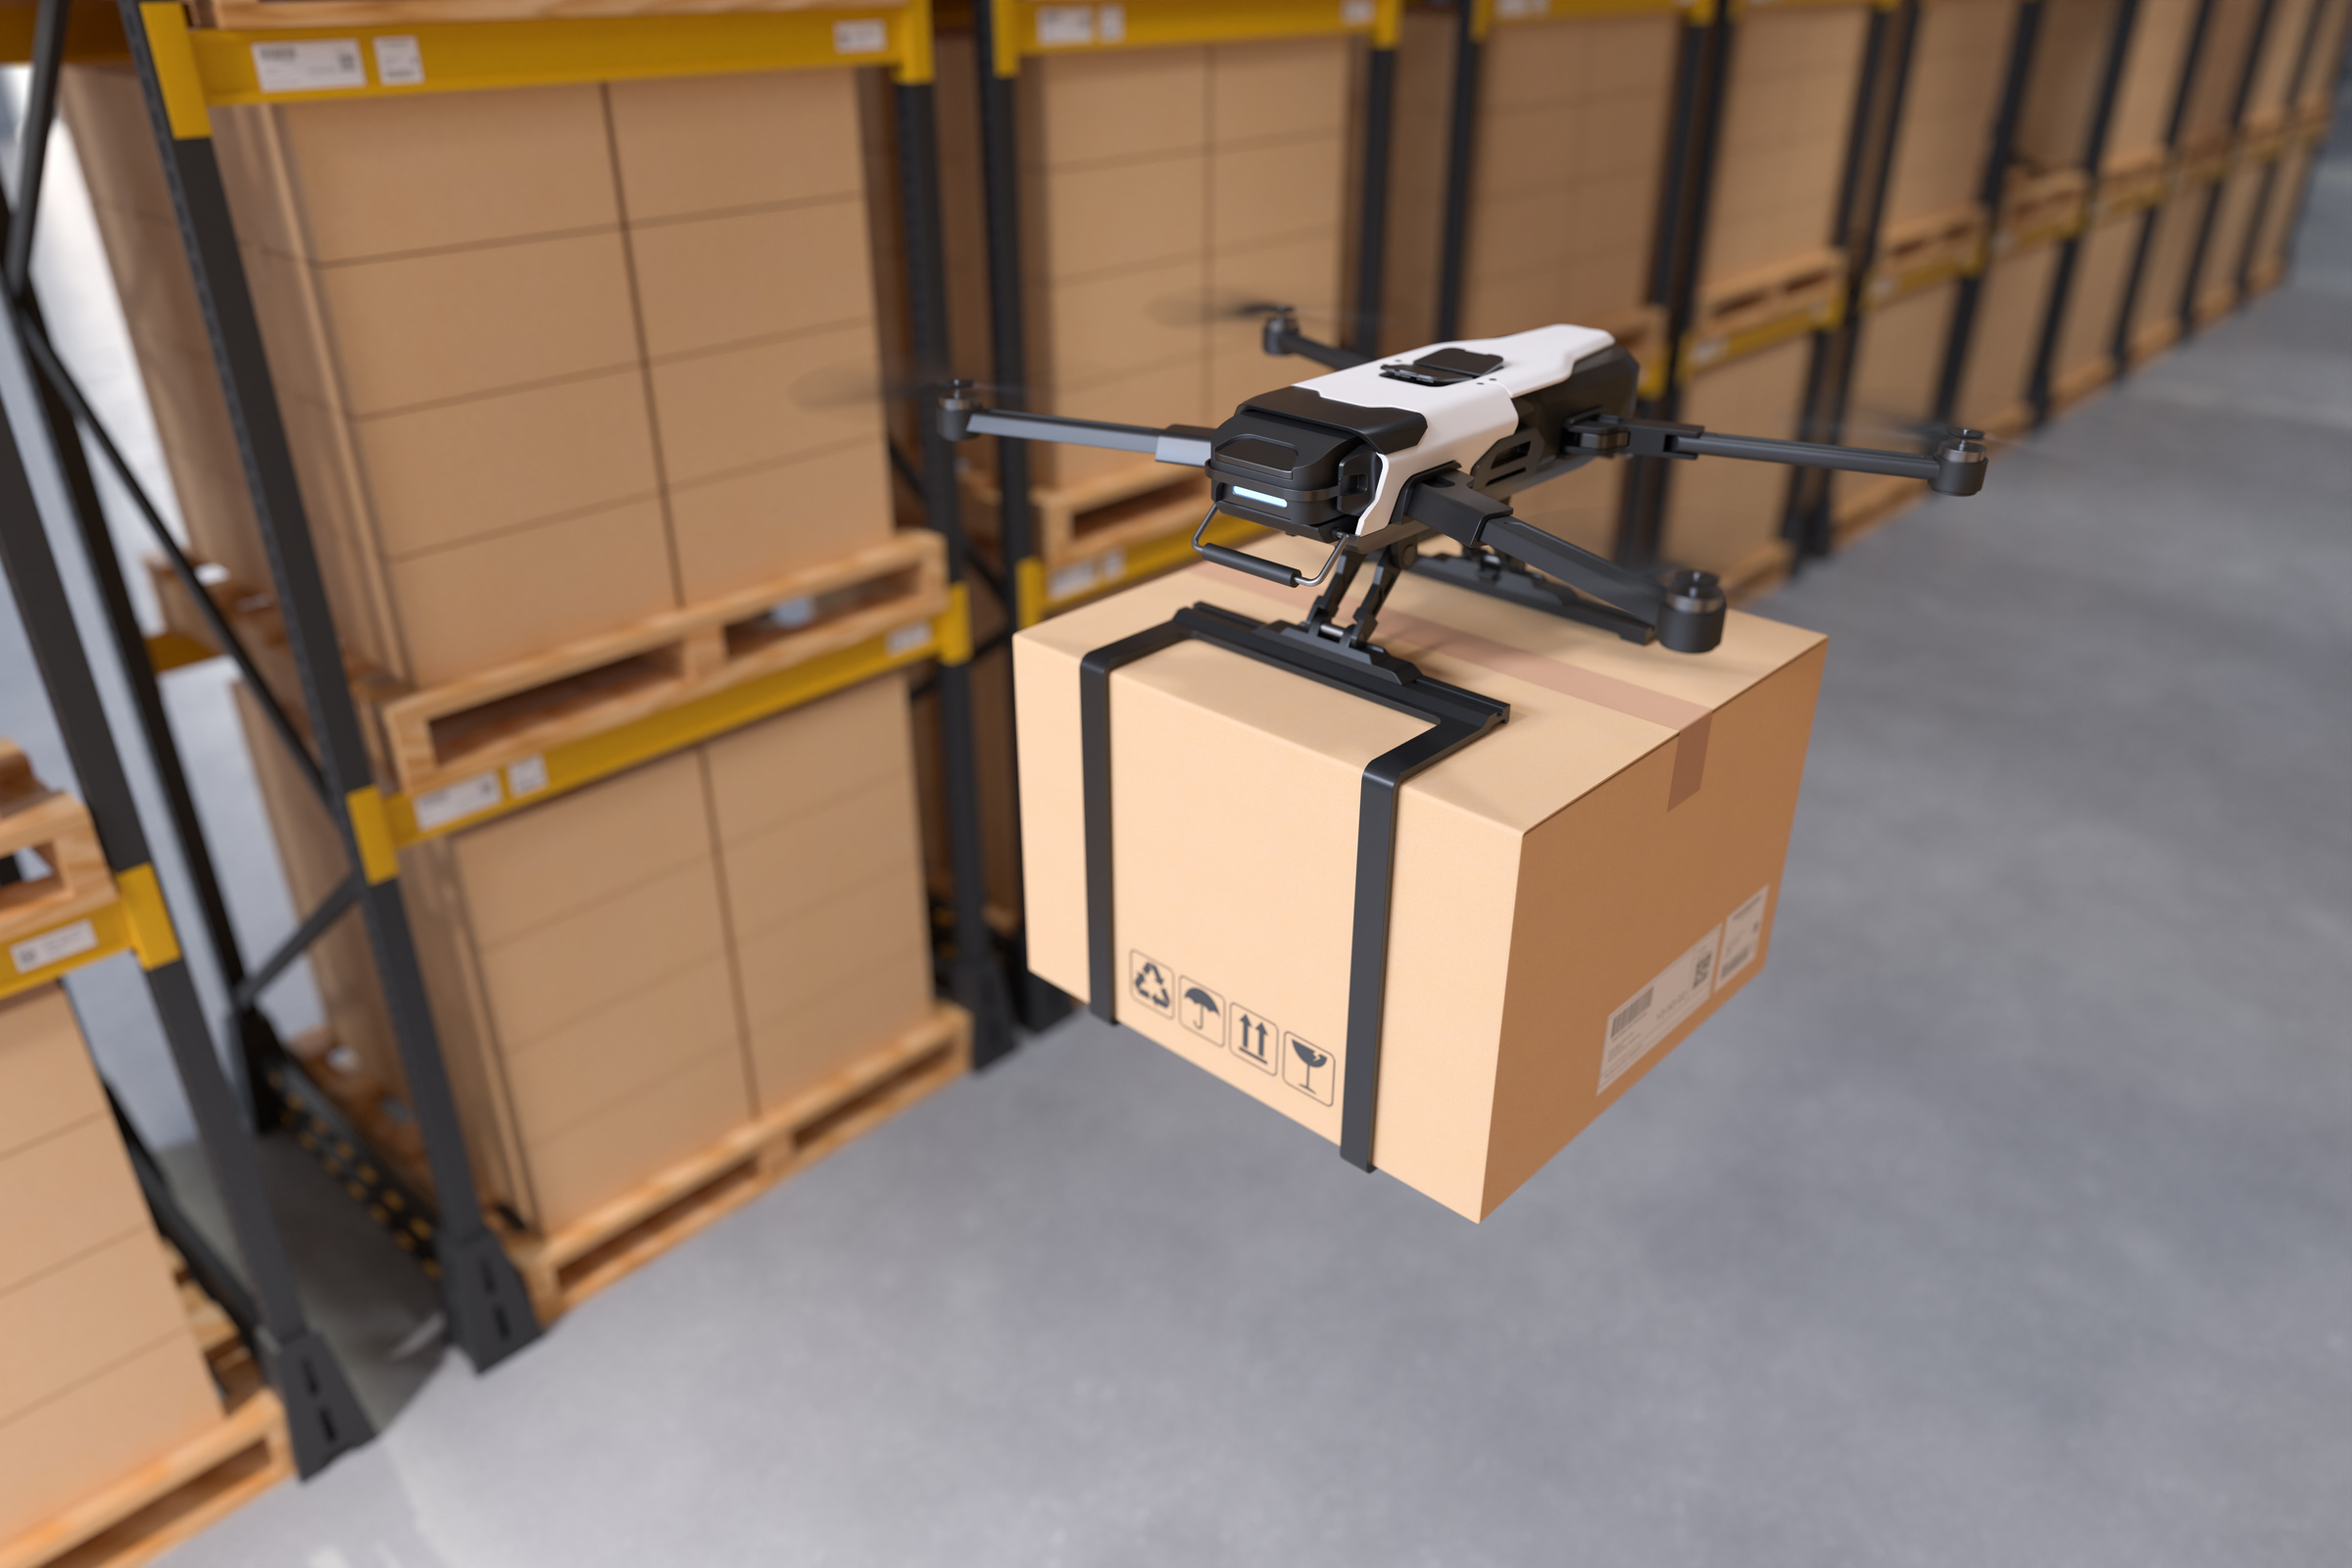 Delivery Drone for Air Shipment